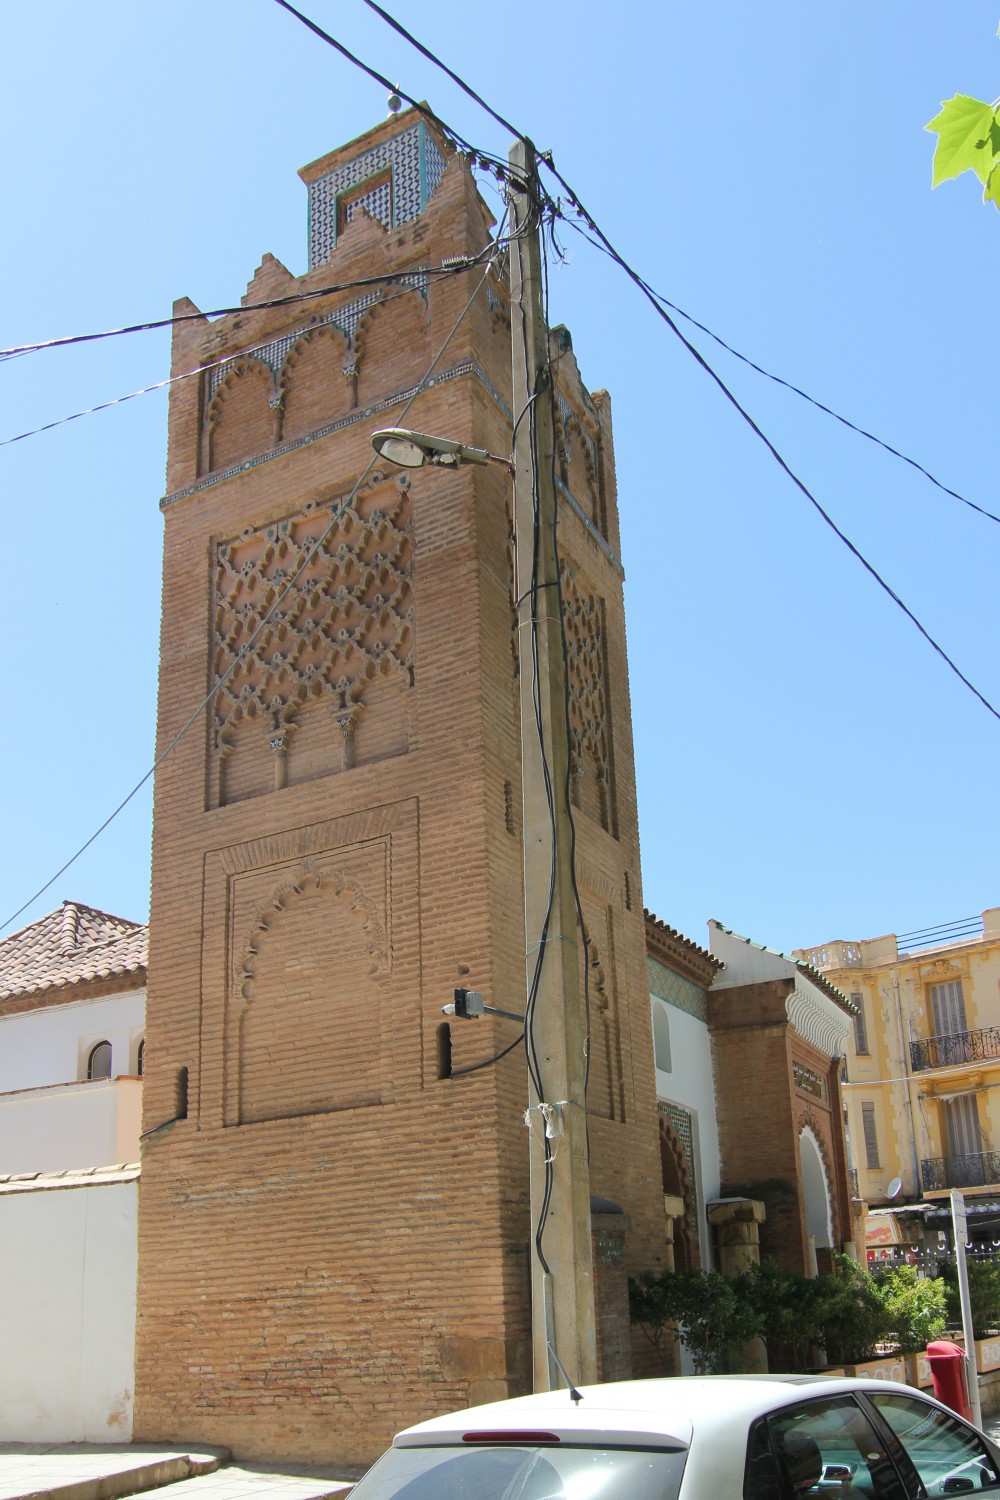 View of the south side of the minaret